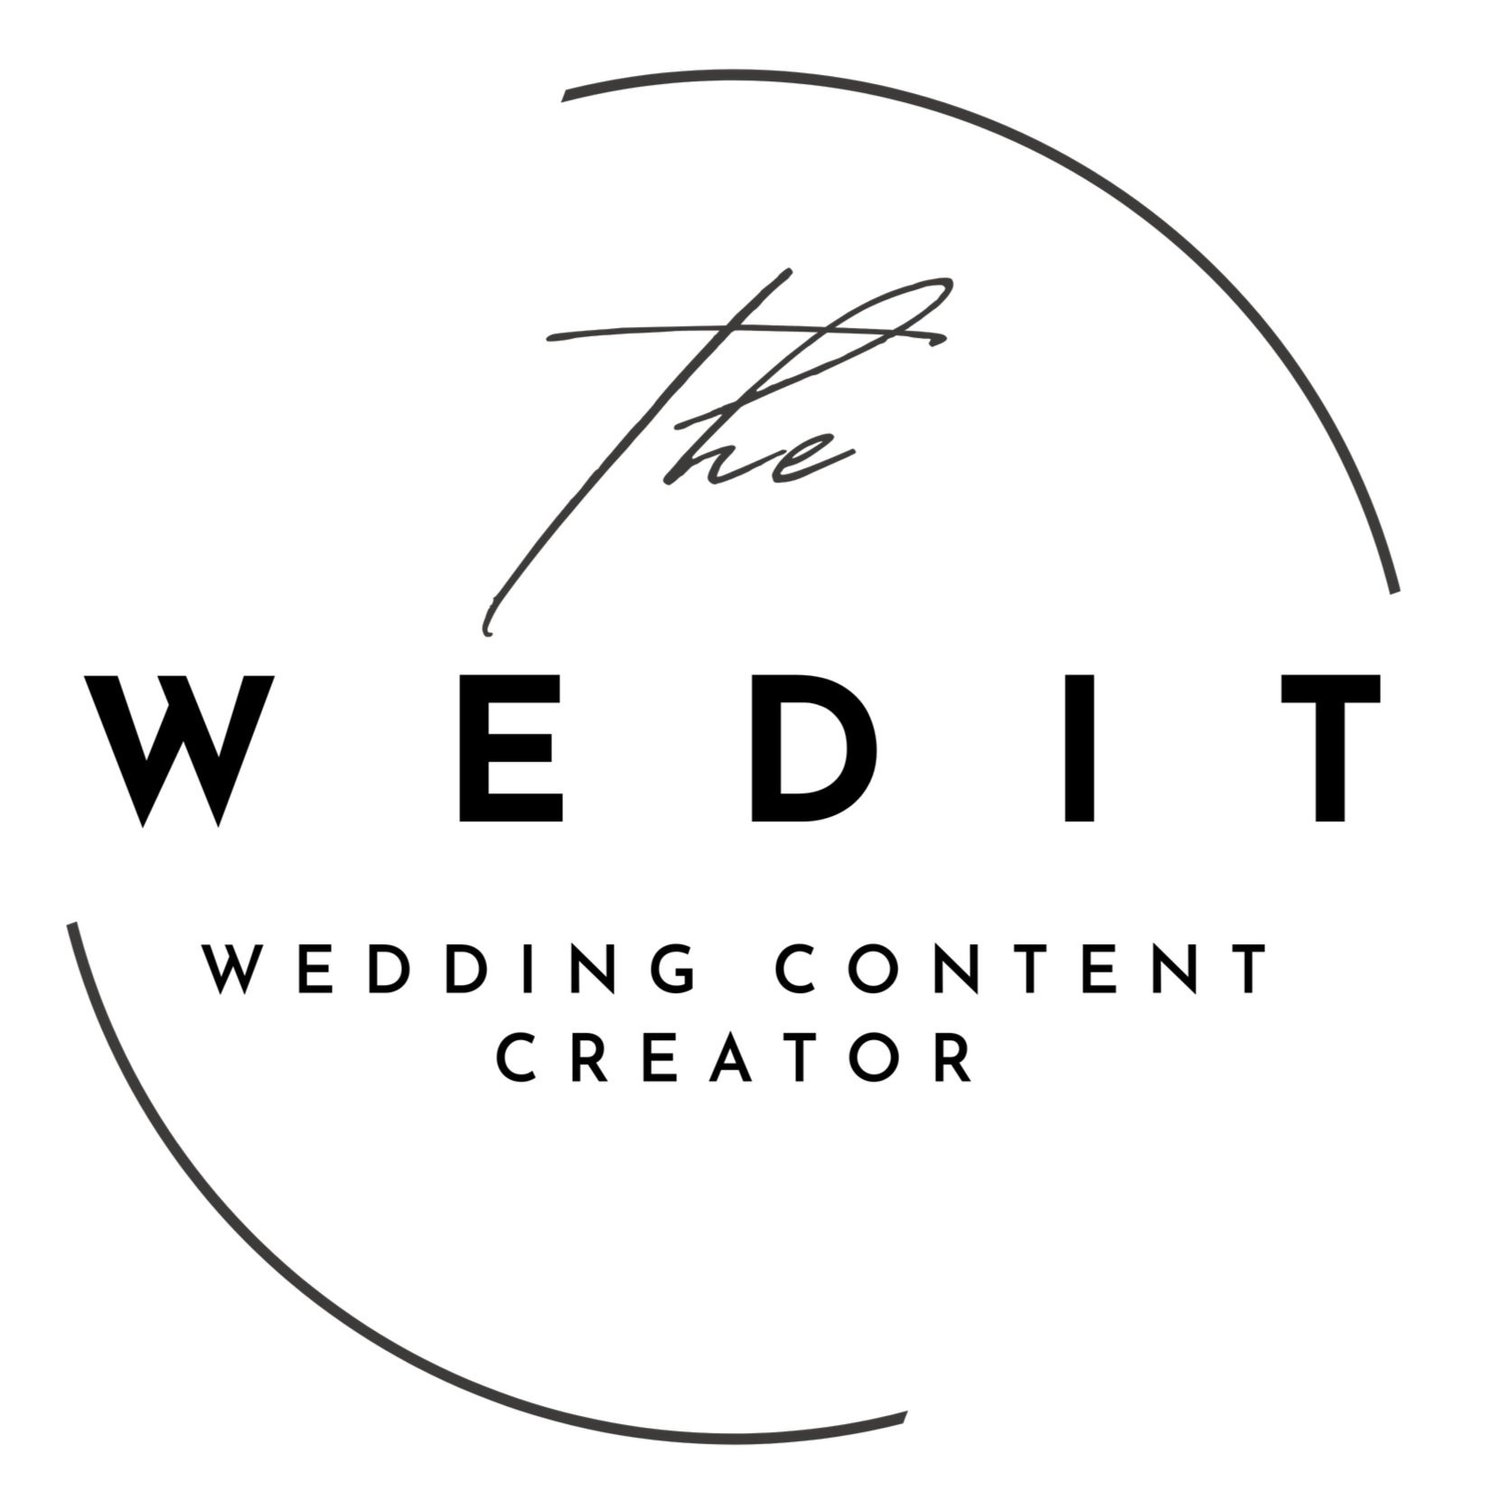 The Wedit